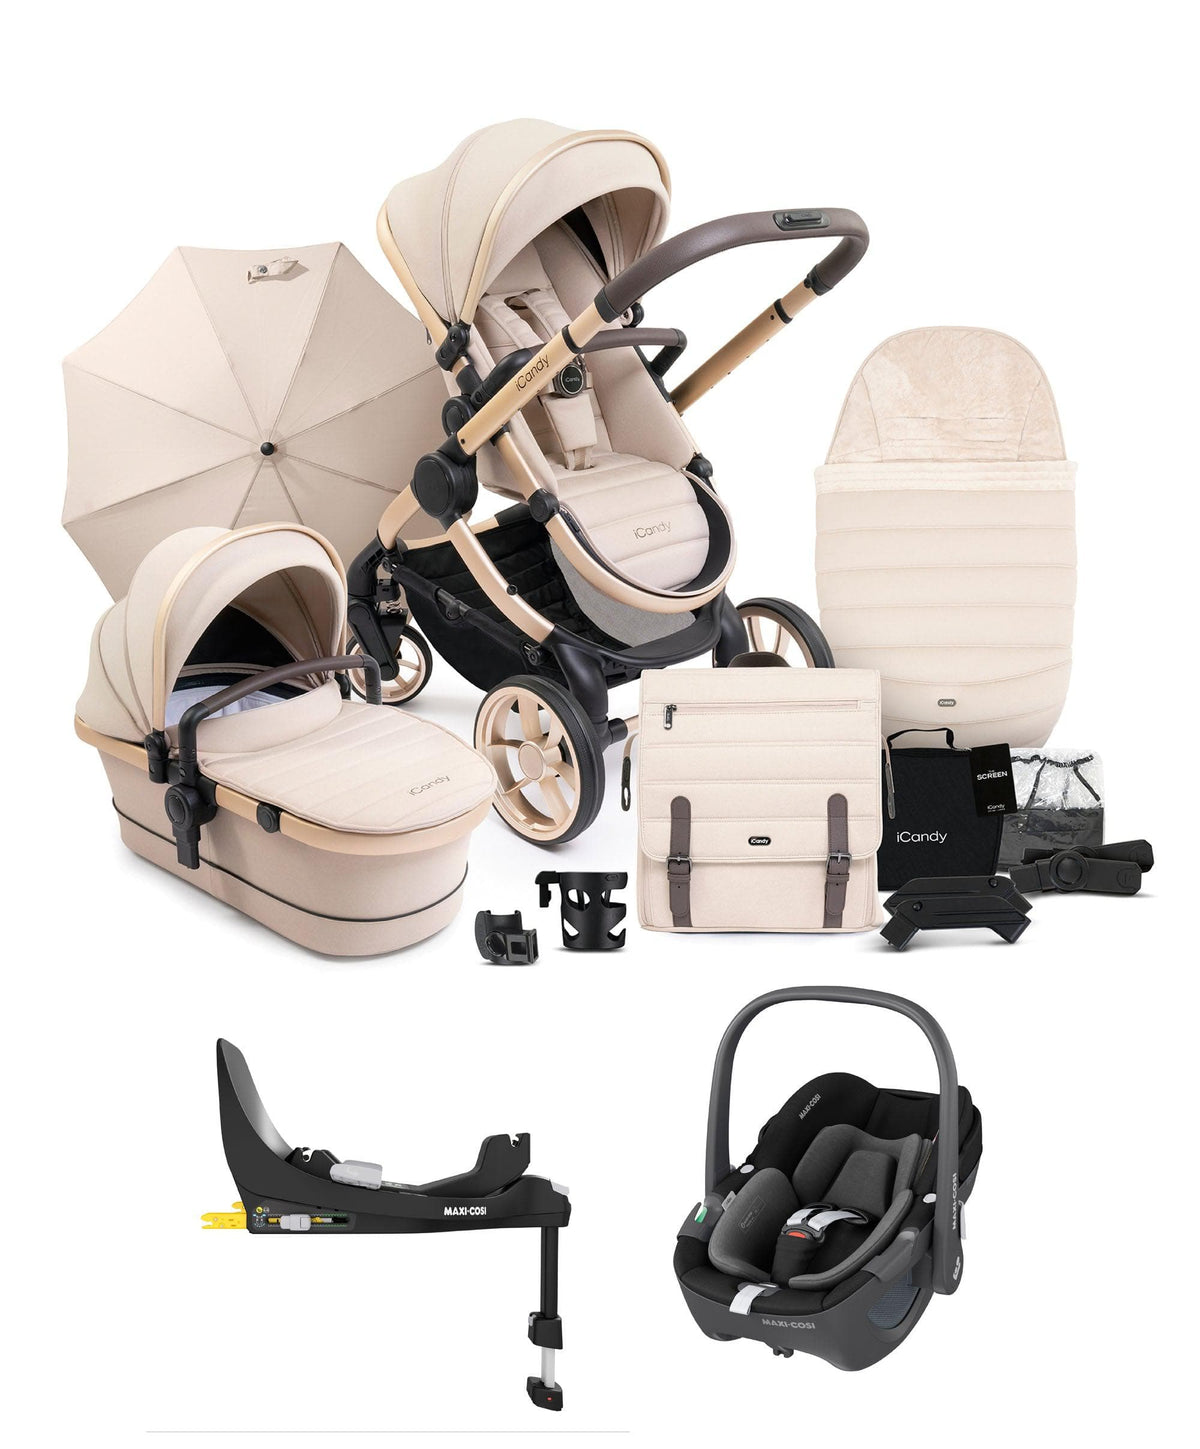 iCandy Peach 7 Complete Pushchair Bundle with Maxi-Cosi Pebble 360 Car Seat & Base - Biscotti